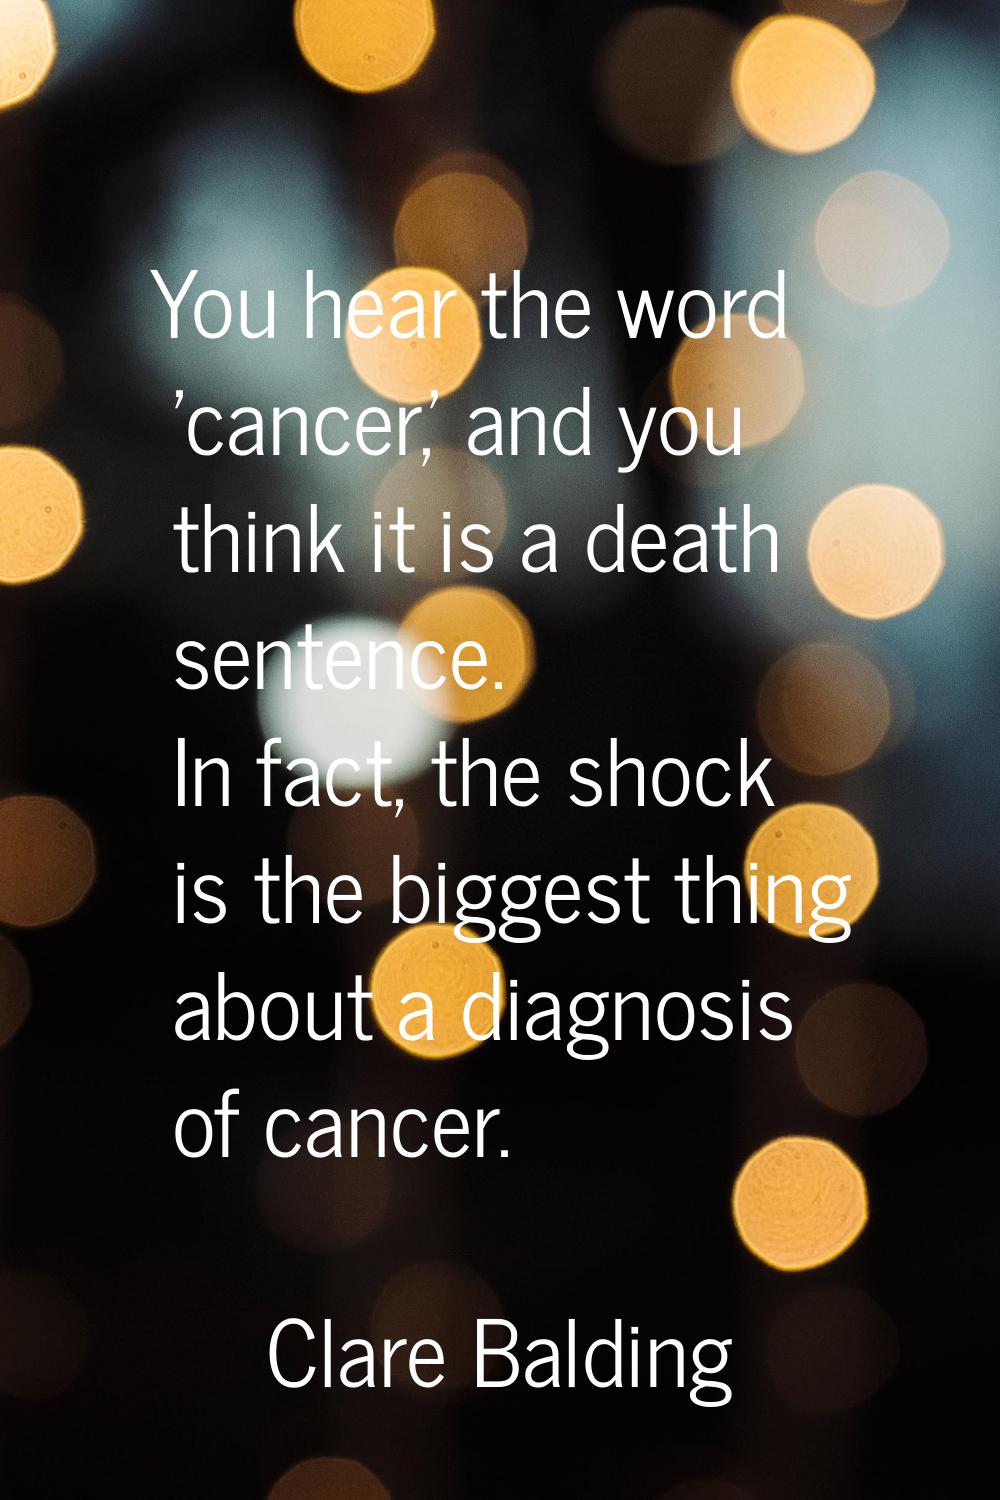 You hear the word 'cancer,' and you think it is a death sentence. In fact, the shock is the biggest